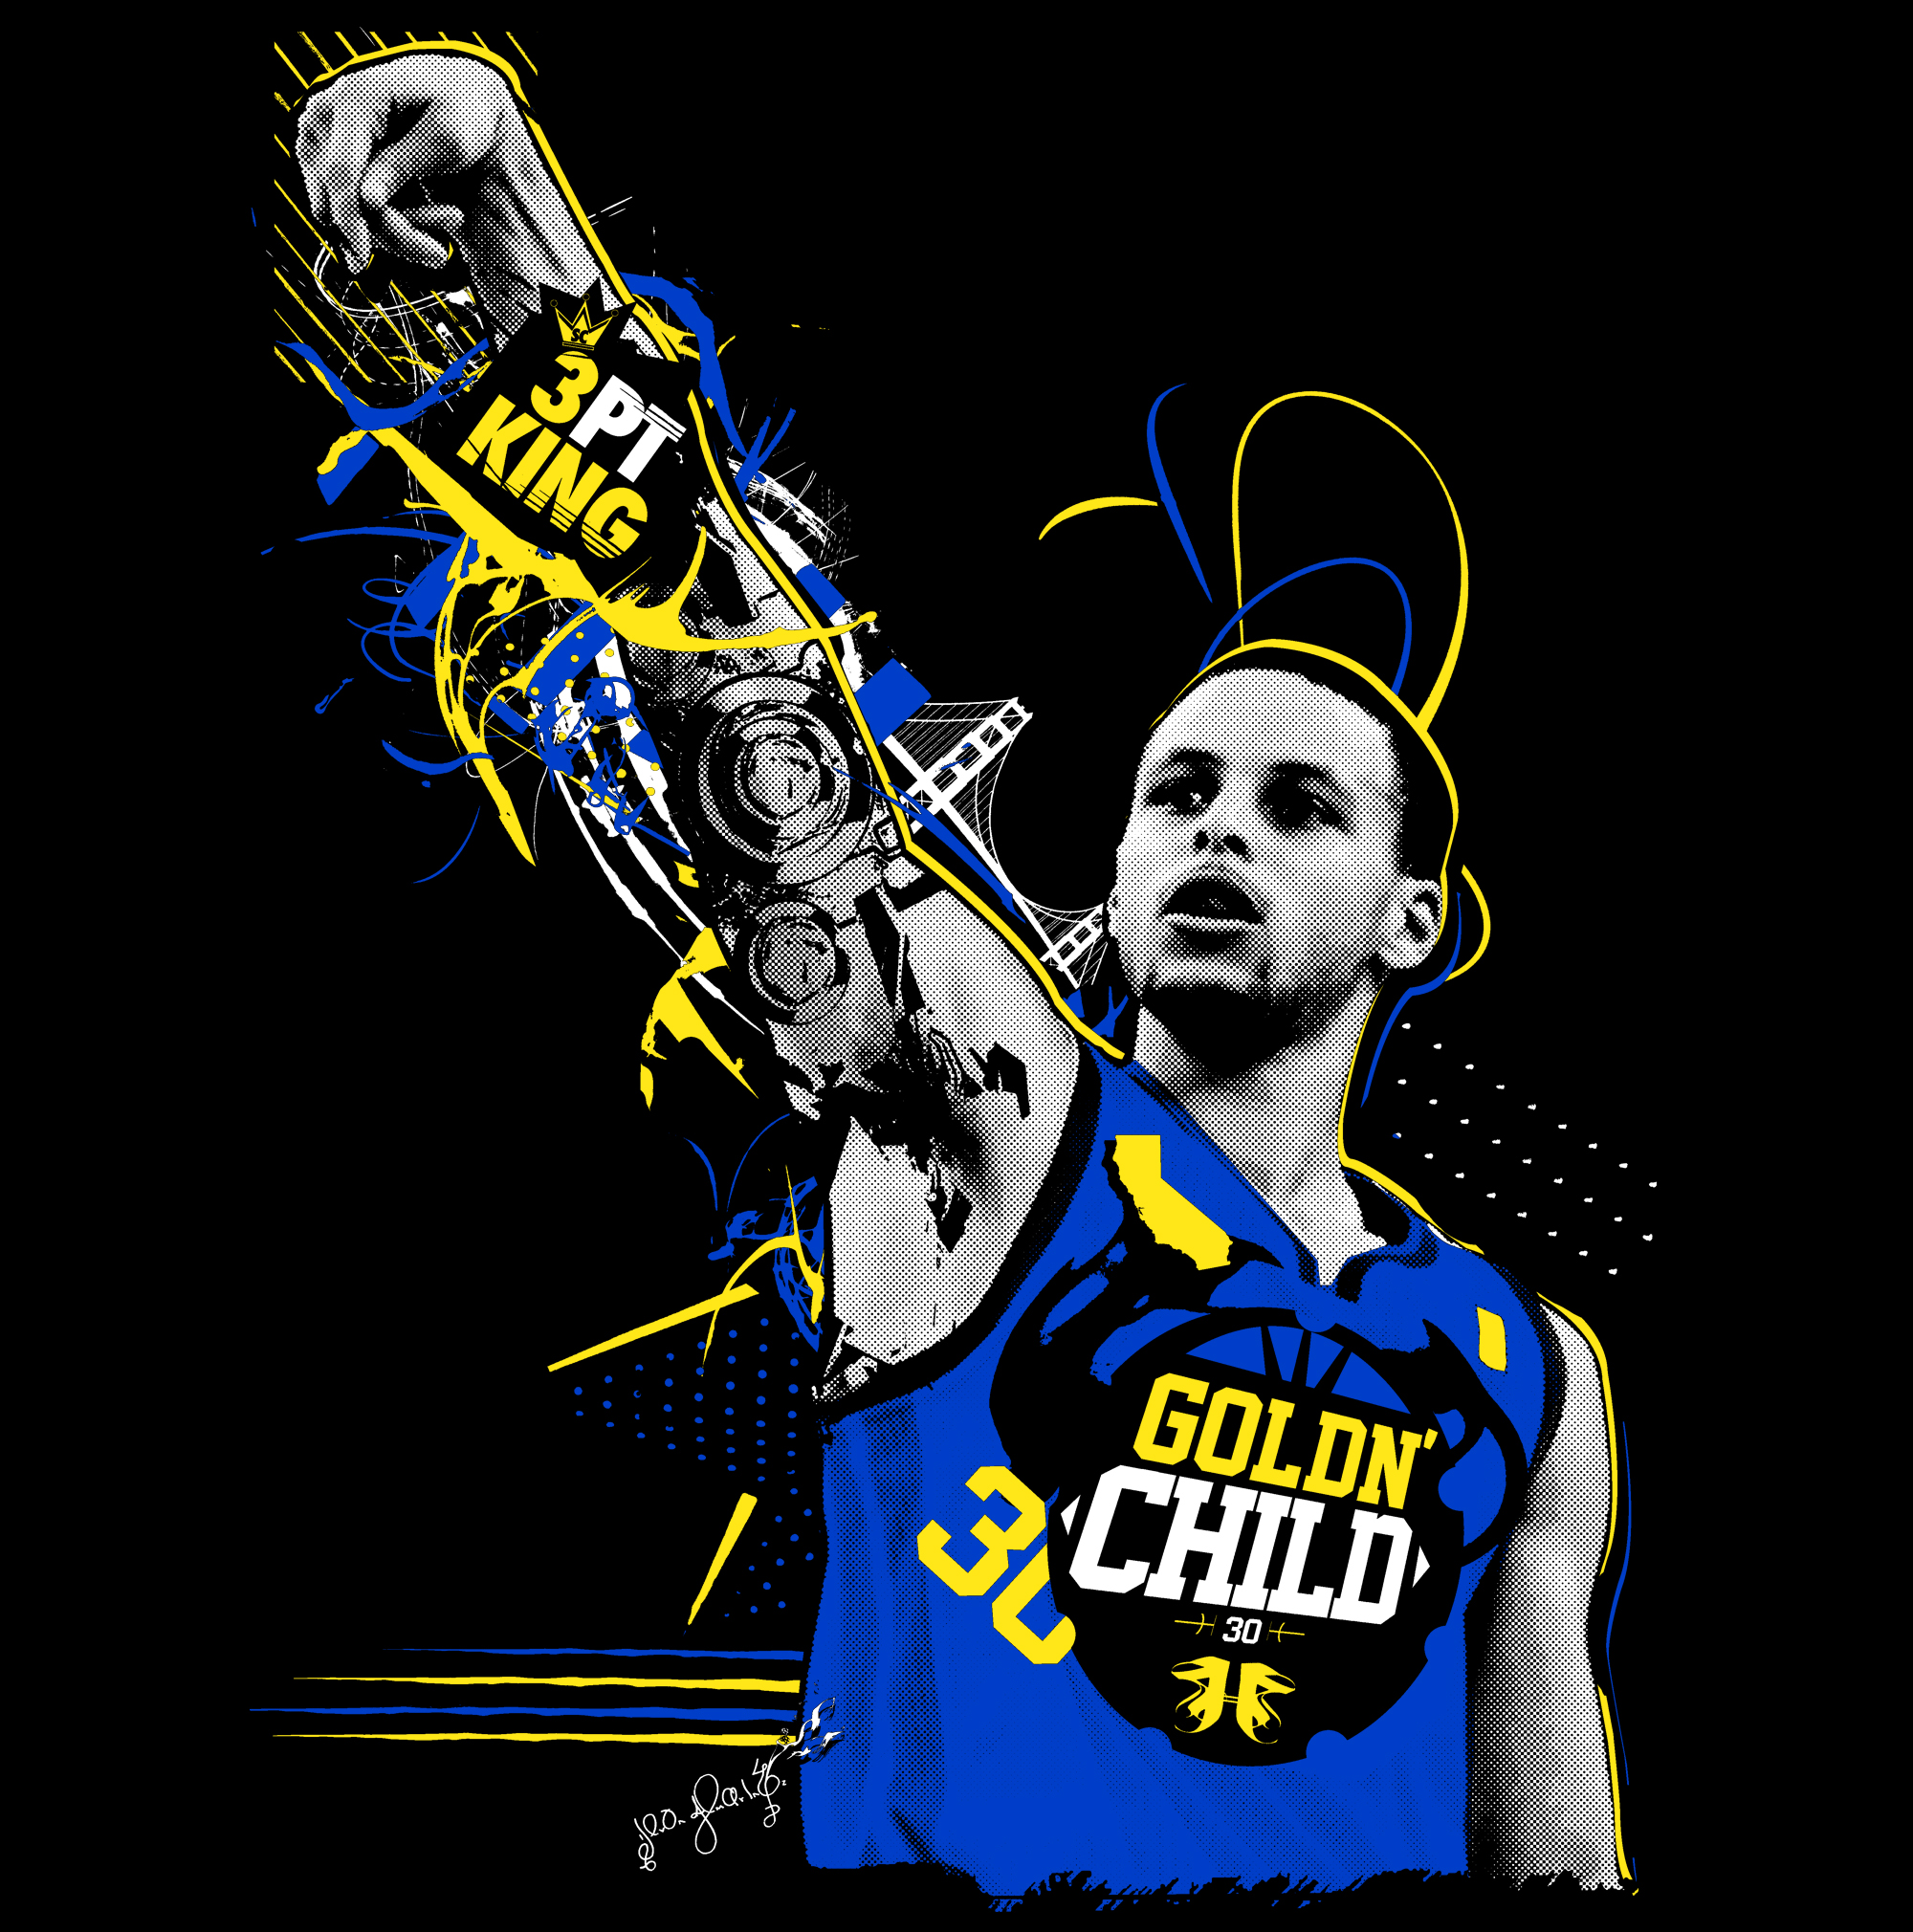 nba wallpapers stephen curry,basketball player,graphic design,t shirt,lacrosse stick,sports uniform